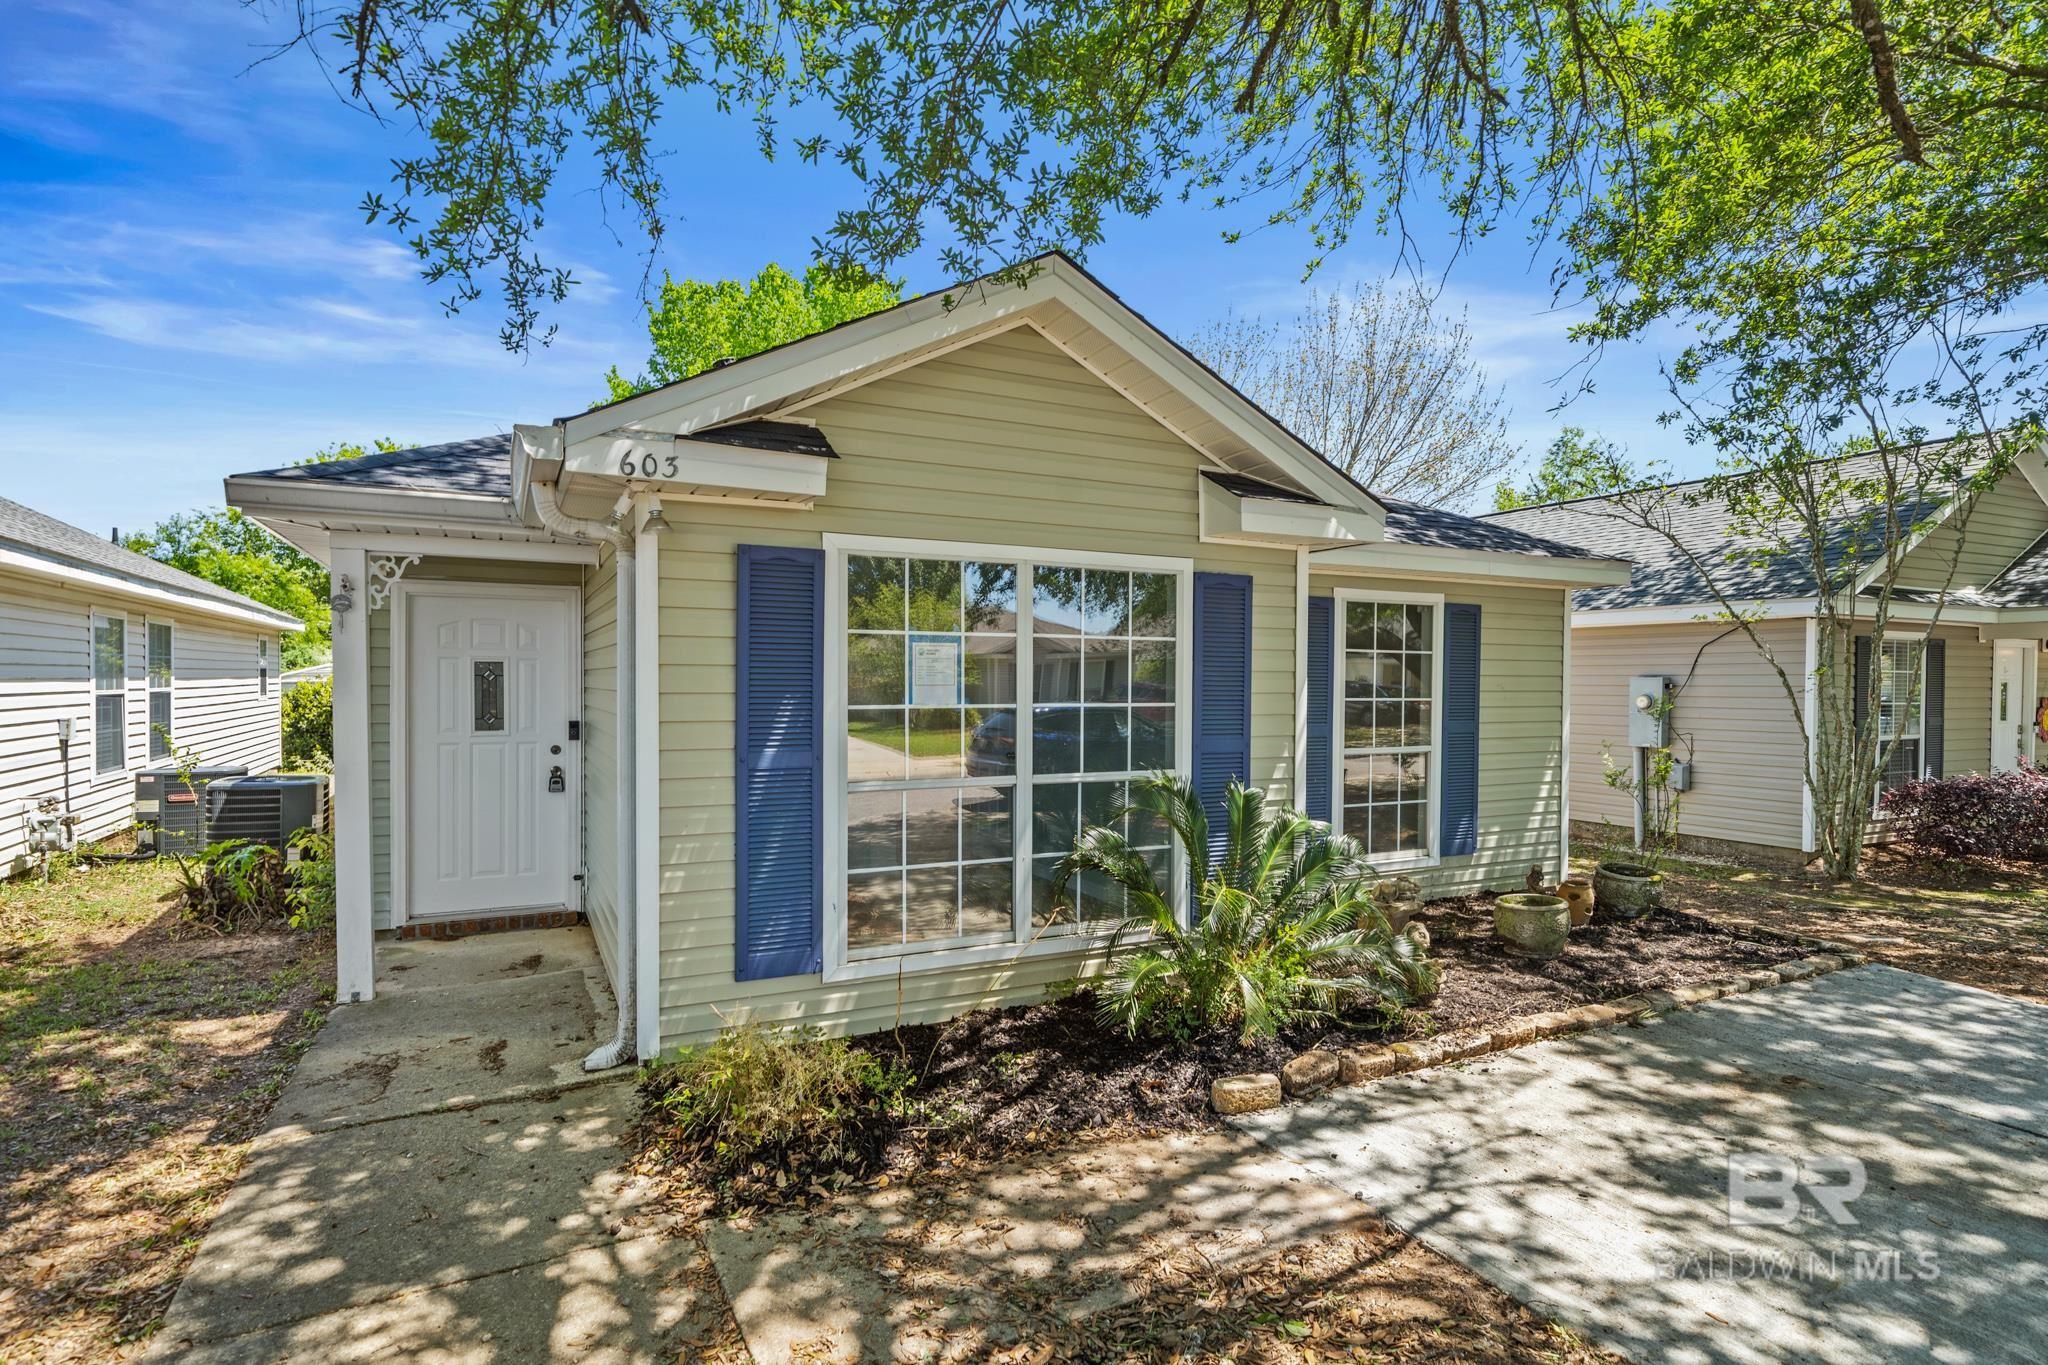 Small town charming streets, endless bay views, sprawling Live Oak canopies, and sunsets that seem to last a lifetime... Welcome to picturesque Fairhope, Alabama! This thoughtfully renovated home is situated only minutes from the famed downtown streets in the cottage community of Belle Chase. This like-new home features a brand new 2024 FORTIFIED roof which offers peace of mind and potential savings!!  Inside, new Luxury vinyl plank flooring flows seamlessly into the living room complete with vaulted ceilings and a fireplace.  In the front of the home, two bedrooms are situated off of the side hall, both share a common guest bath also located off of the hall. Back through the living area, a newly renovated kitchen with white cabinets, Quartz counters, and stainless appliances offer a beautiful space to prepare your fresh catch of the day or any culinary masterpiece of your choosing. A spacious dining nook is attached to the kitchen as well as a generously sized laundry room.   Off of the dining area, the Primary bedroom is located at the back of the home with an adjoining bathroom as well as an oversized closet.  Off of the kitchen, a screened porch leads out to a patio and a private back yard.  Unfortunately, only one lucky new Fairhopian can call this adorable cottage home, so time is of the essence!!  Call your favorite agent today to schedule a showing, and discover your new life in Fairhope, AL.  Buyer or buyer's agent to verify all pertinent information.